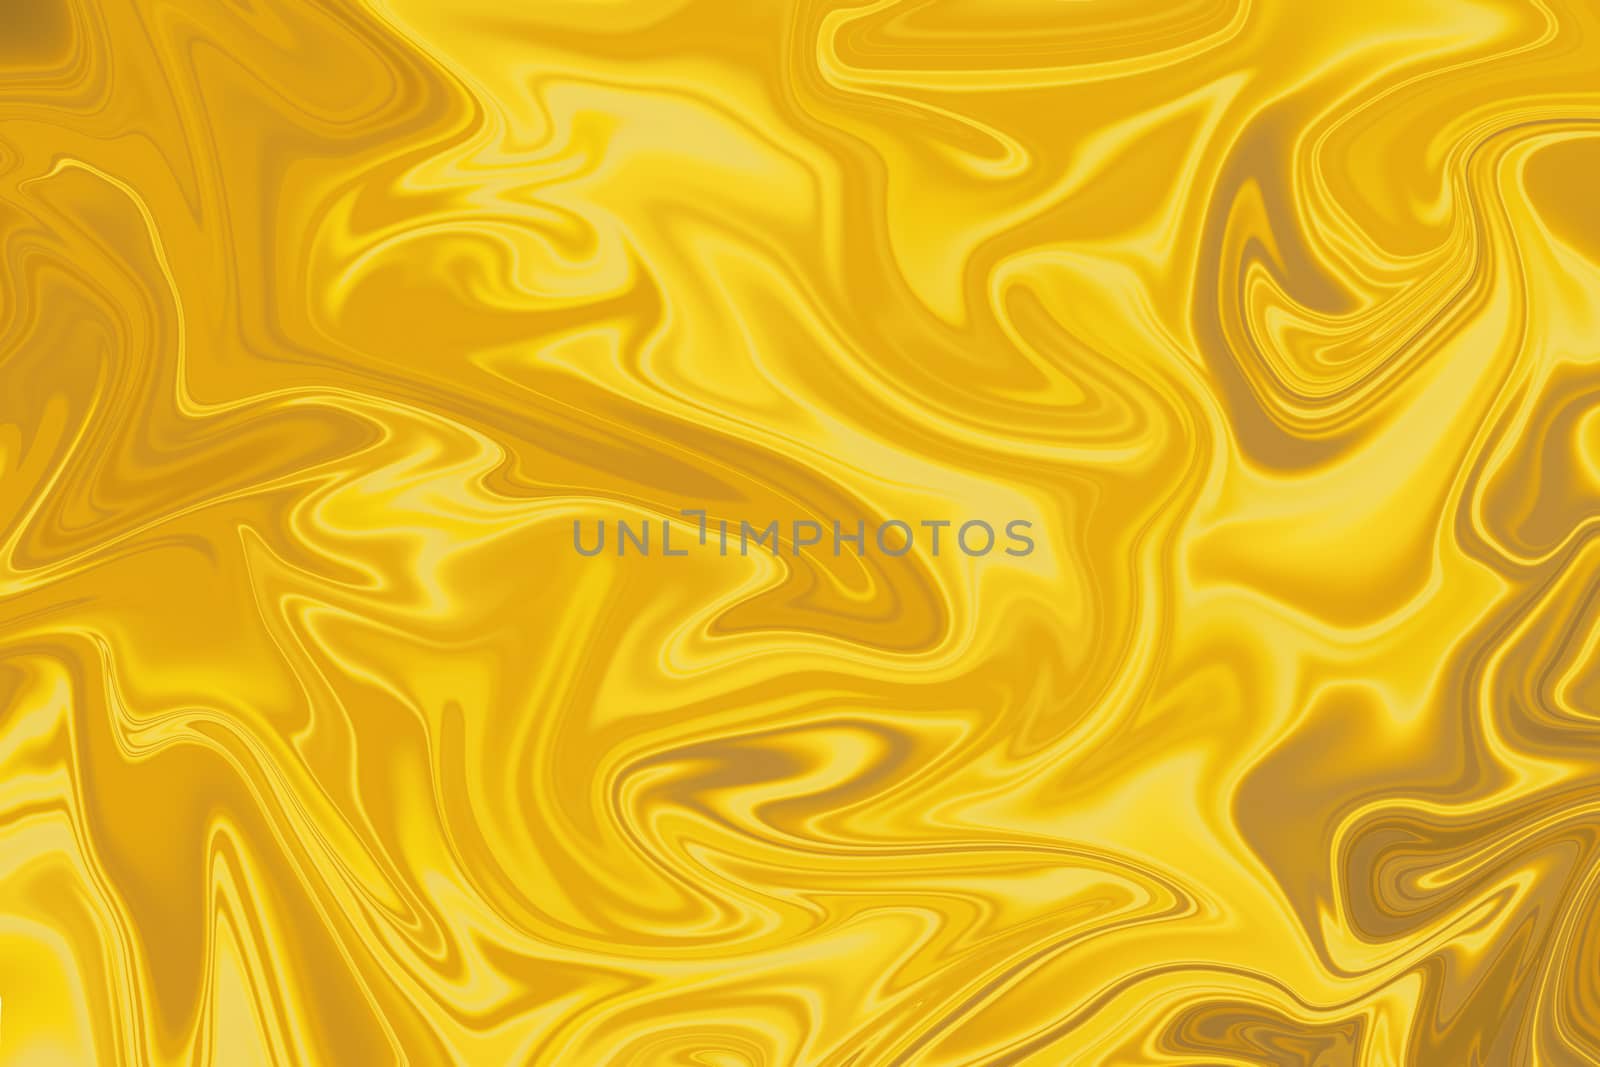 Gold liquid paint marbling and acrylic waves texture background.